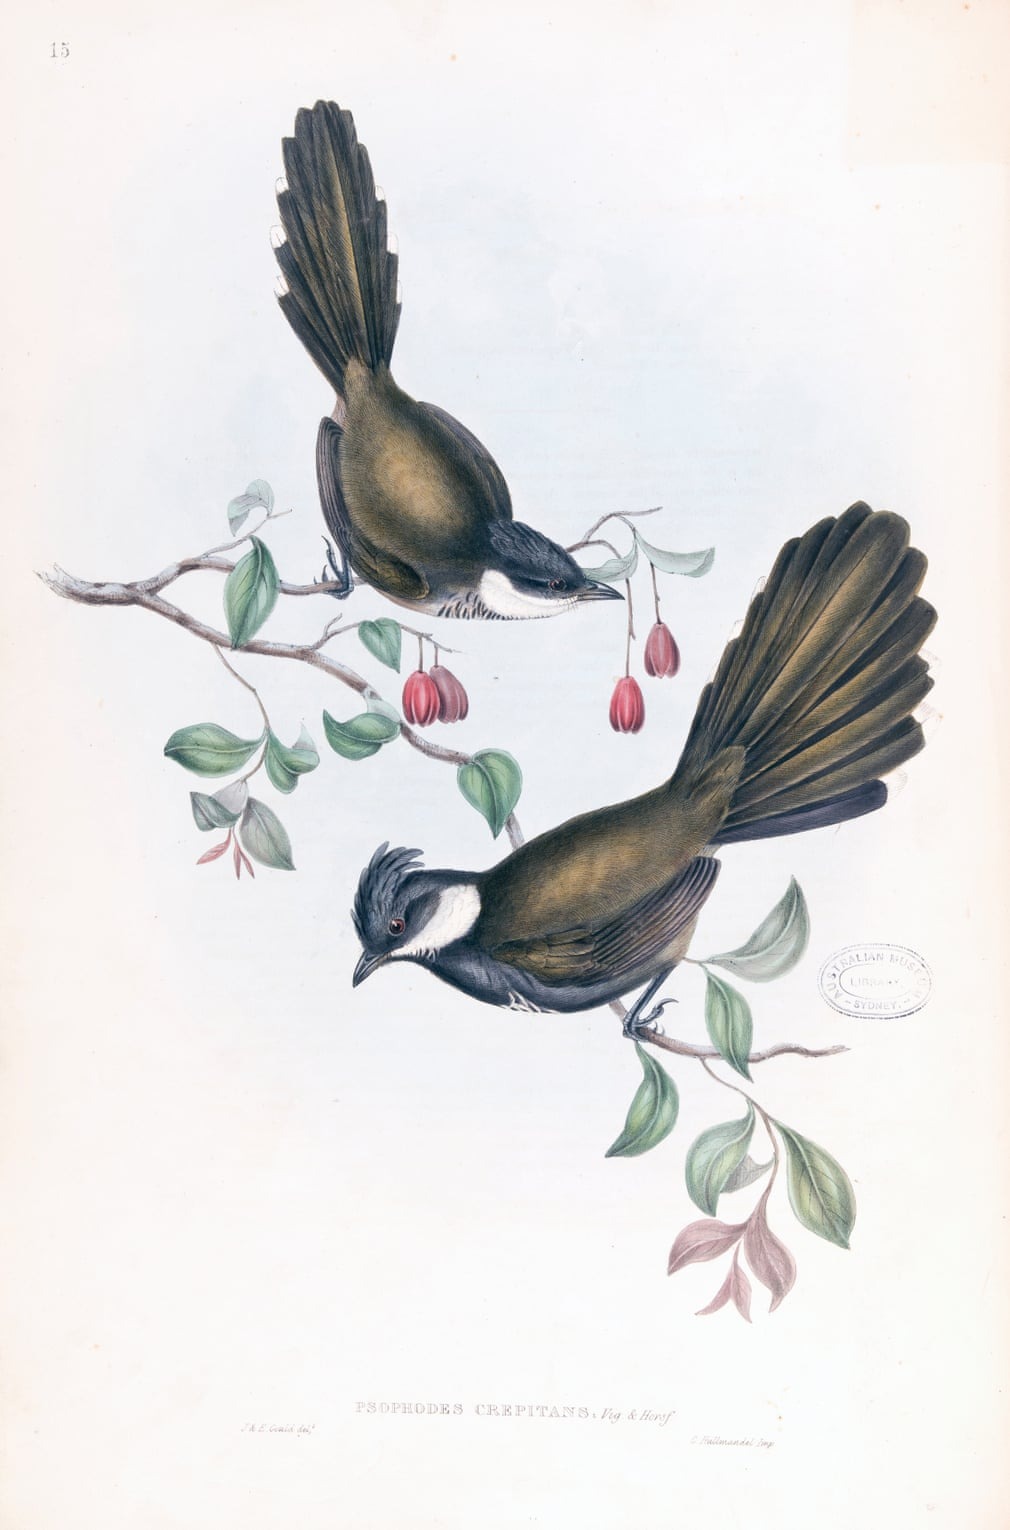 Birds Of Australia, Fascinating Illustrations From The 19th Century By Elizabeth Gould (6)